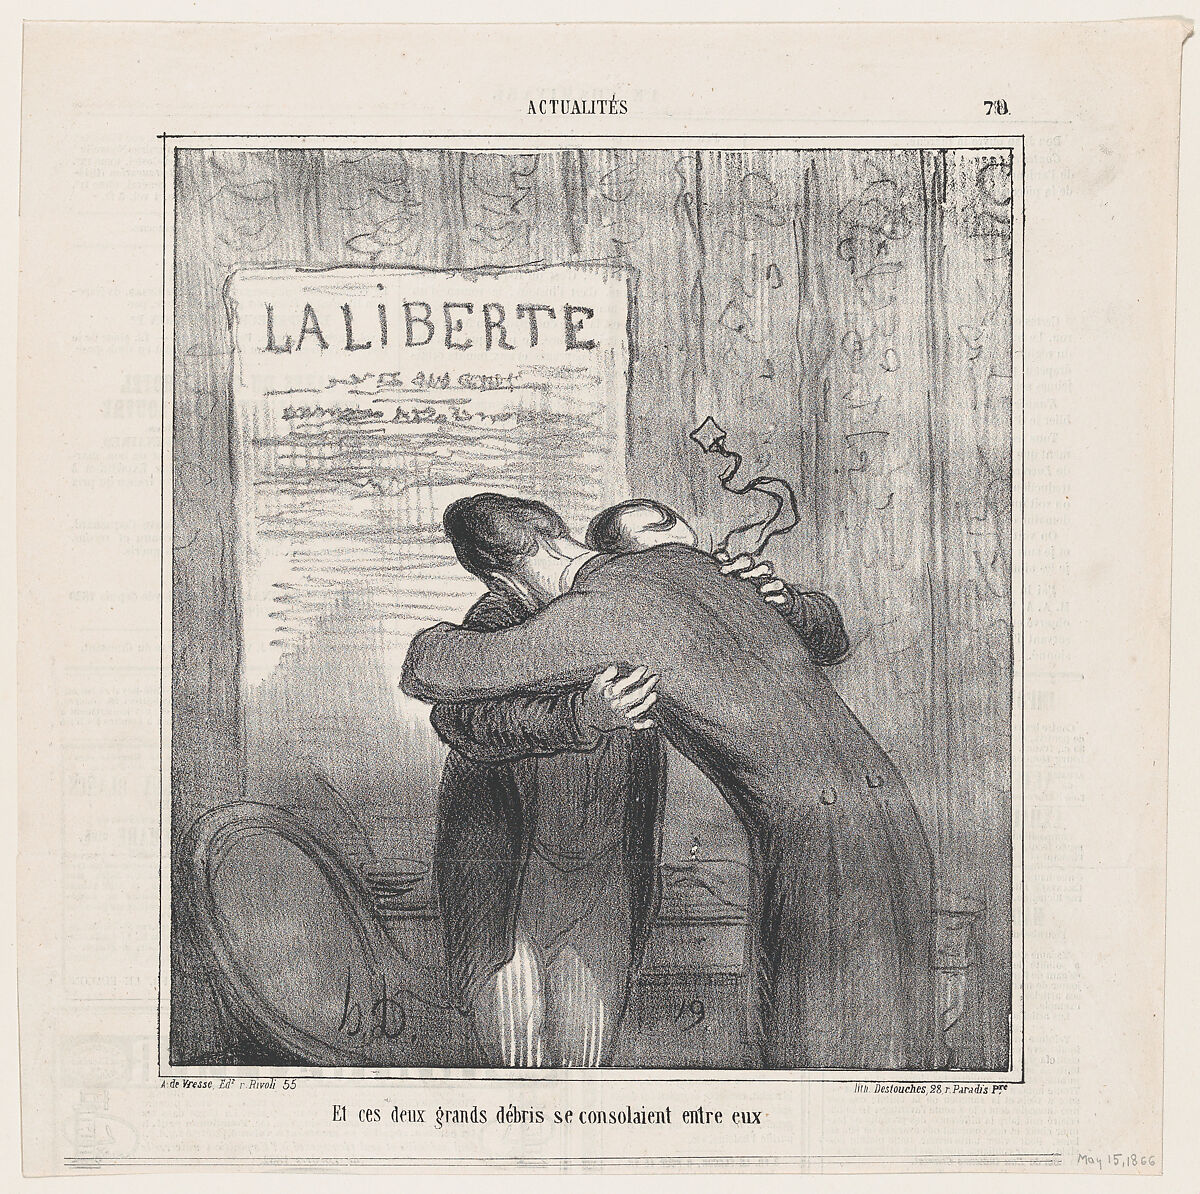 And these two old wrecks consoled each other, from 'News of the day,' published in Le Charivari, May 15, 1866, Honoré Daumier (French, Marseilles 1808–1879 Valmondois), Lithograph on newsprint; second state of two (Delteil) 